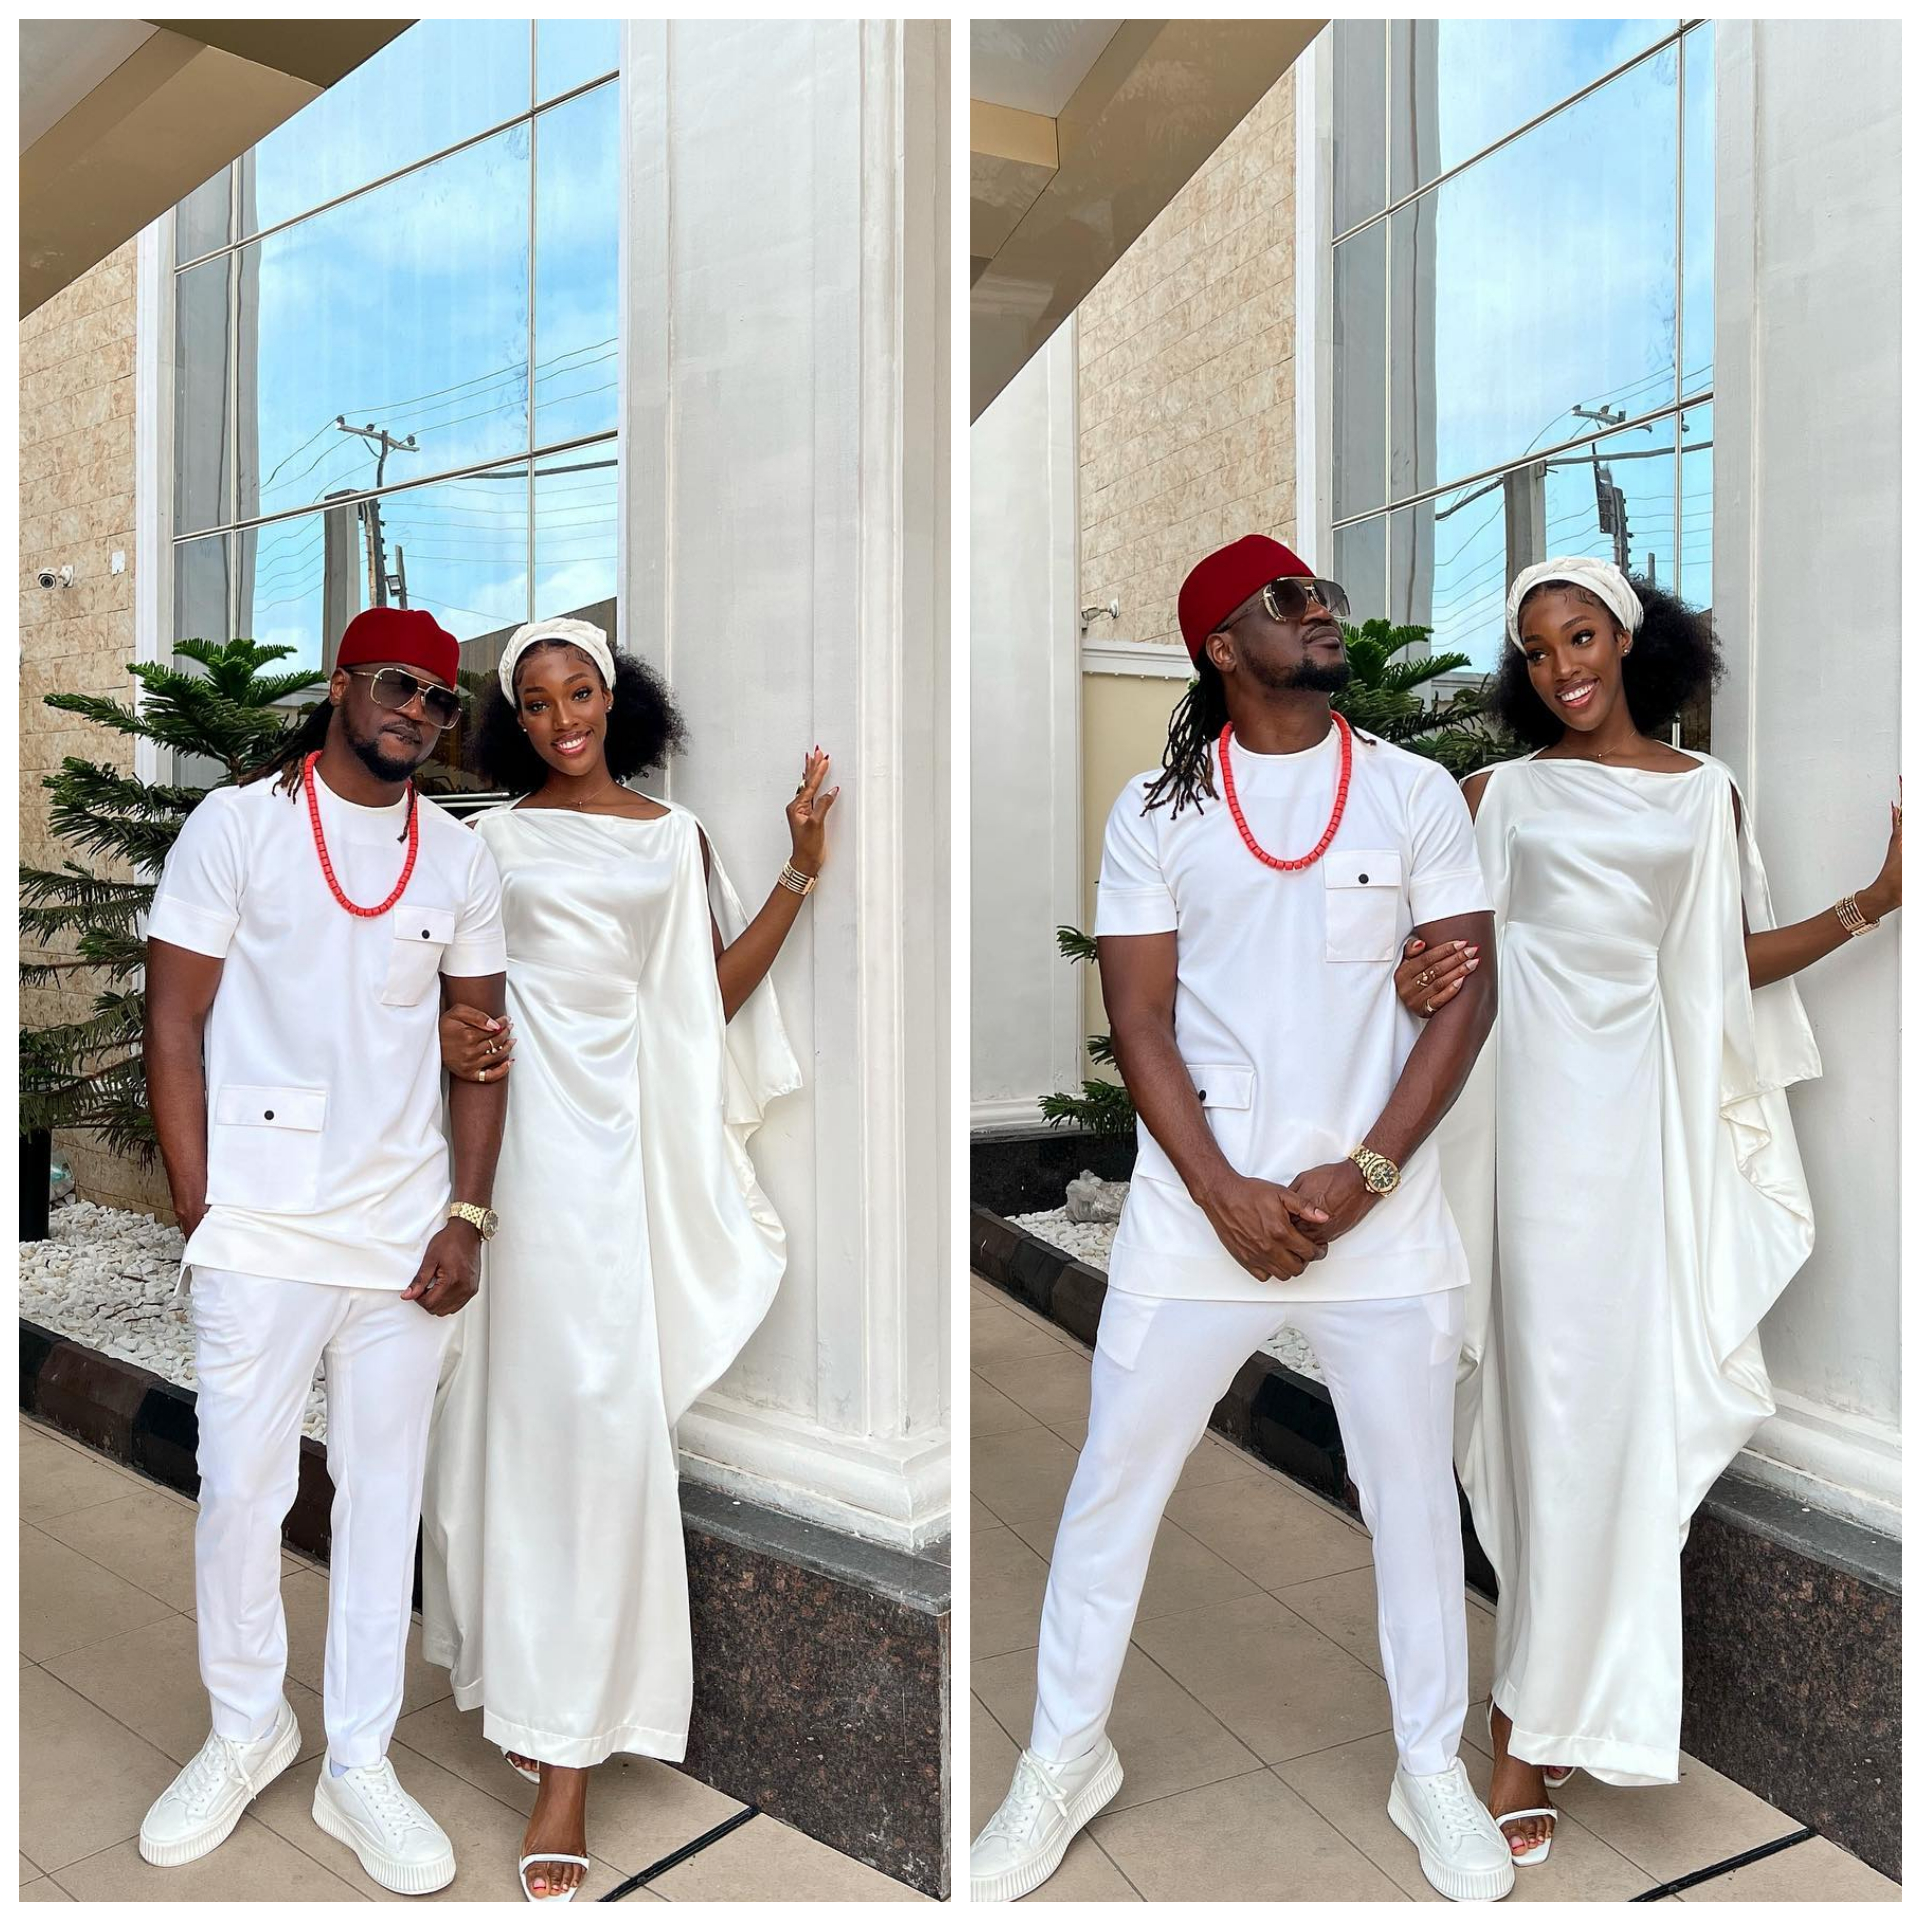 PAUL OKOYE AND HIS GIRLFRIEND STEP OUT TOGETHER IN MATCHING WHITE OUTFITS